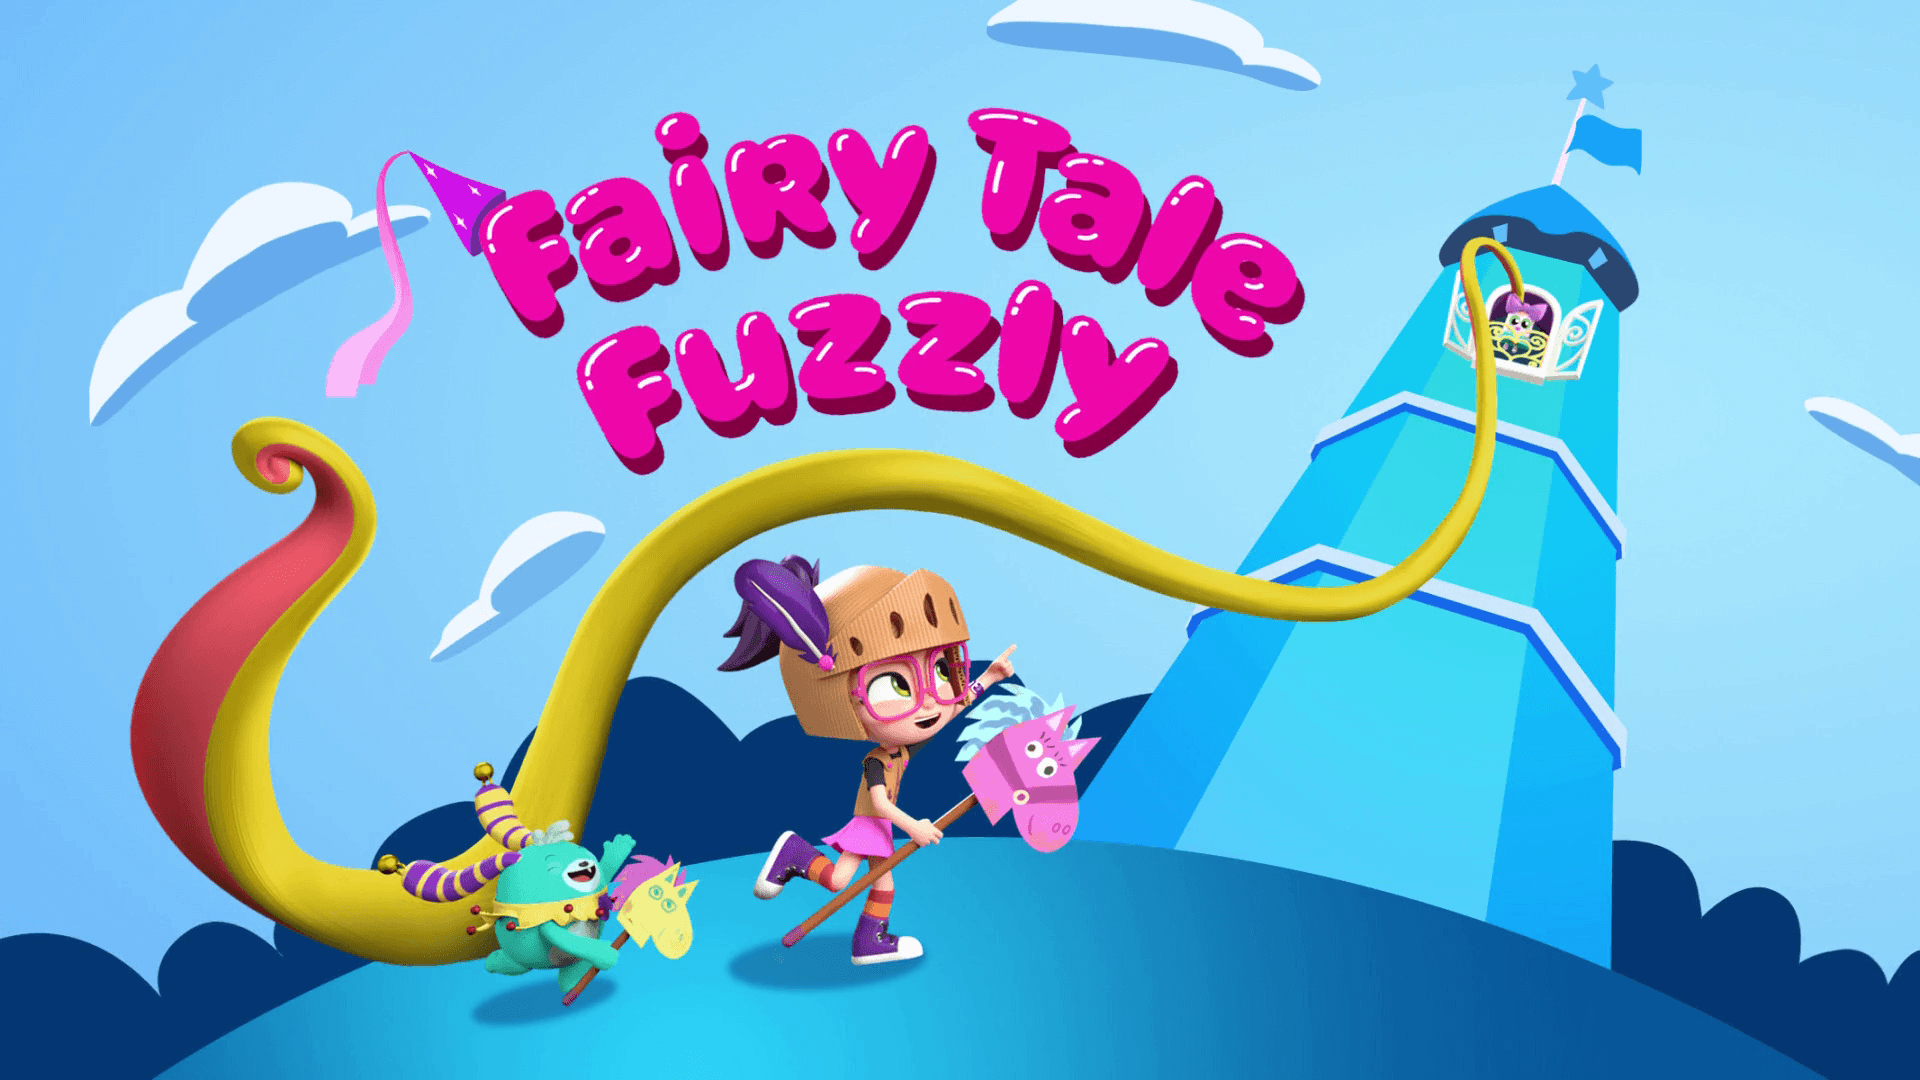 Fairy Tale Fuzzly